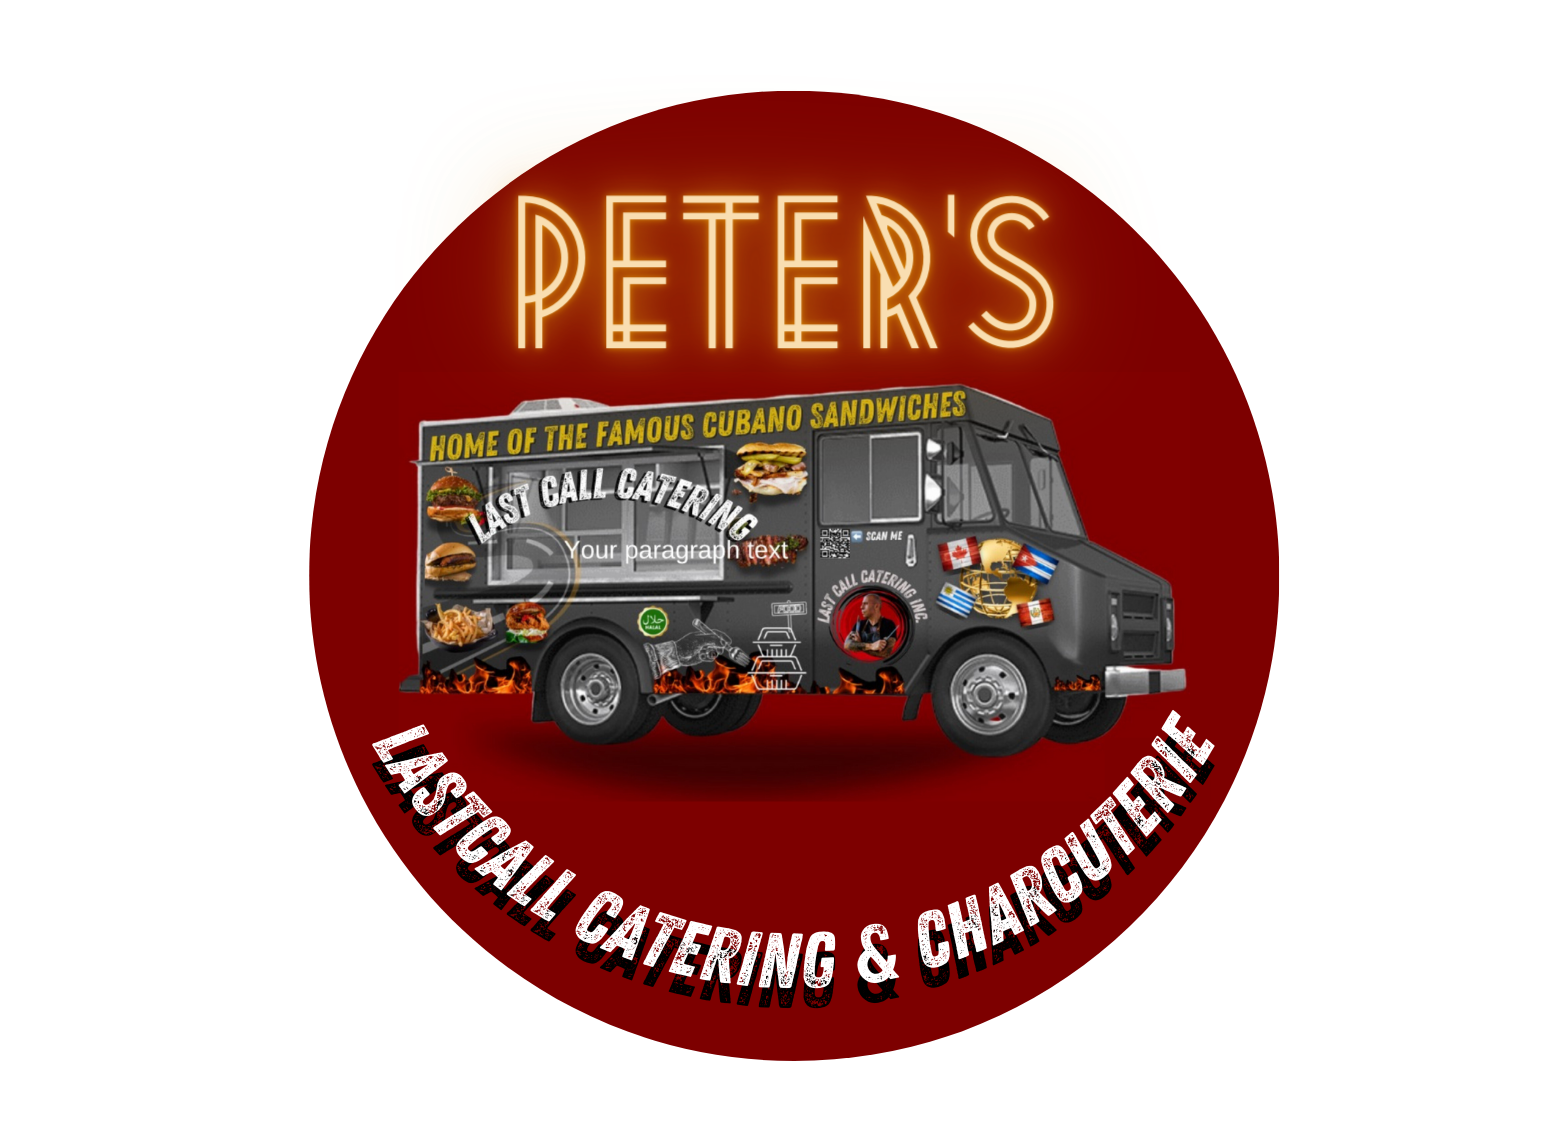 Peter's LastCall Catering & Charcuterie